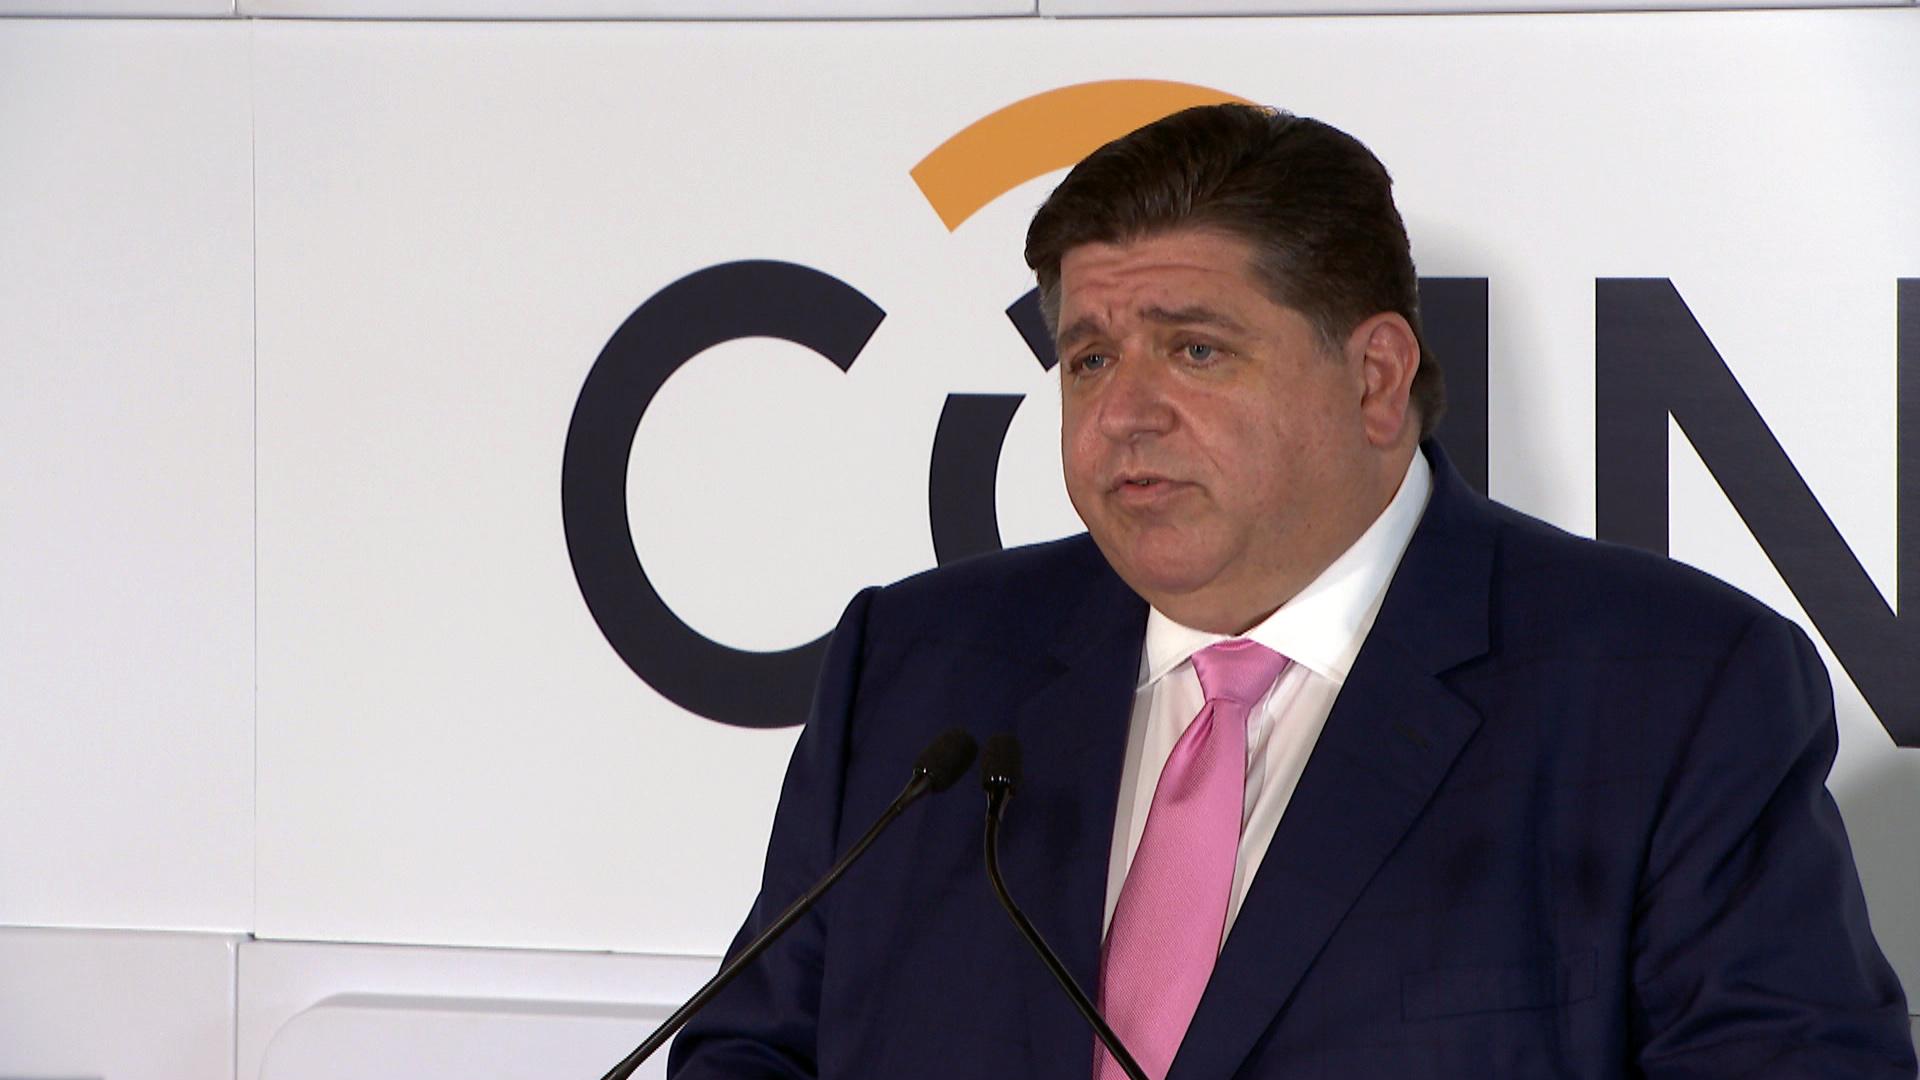 Gov. J.B. Pritzker talks about the surge in COVID-19 cases in Illinois at an unrelated news conference on Tuesday, Aug. 25, 2021. (WTTW News)